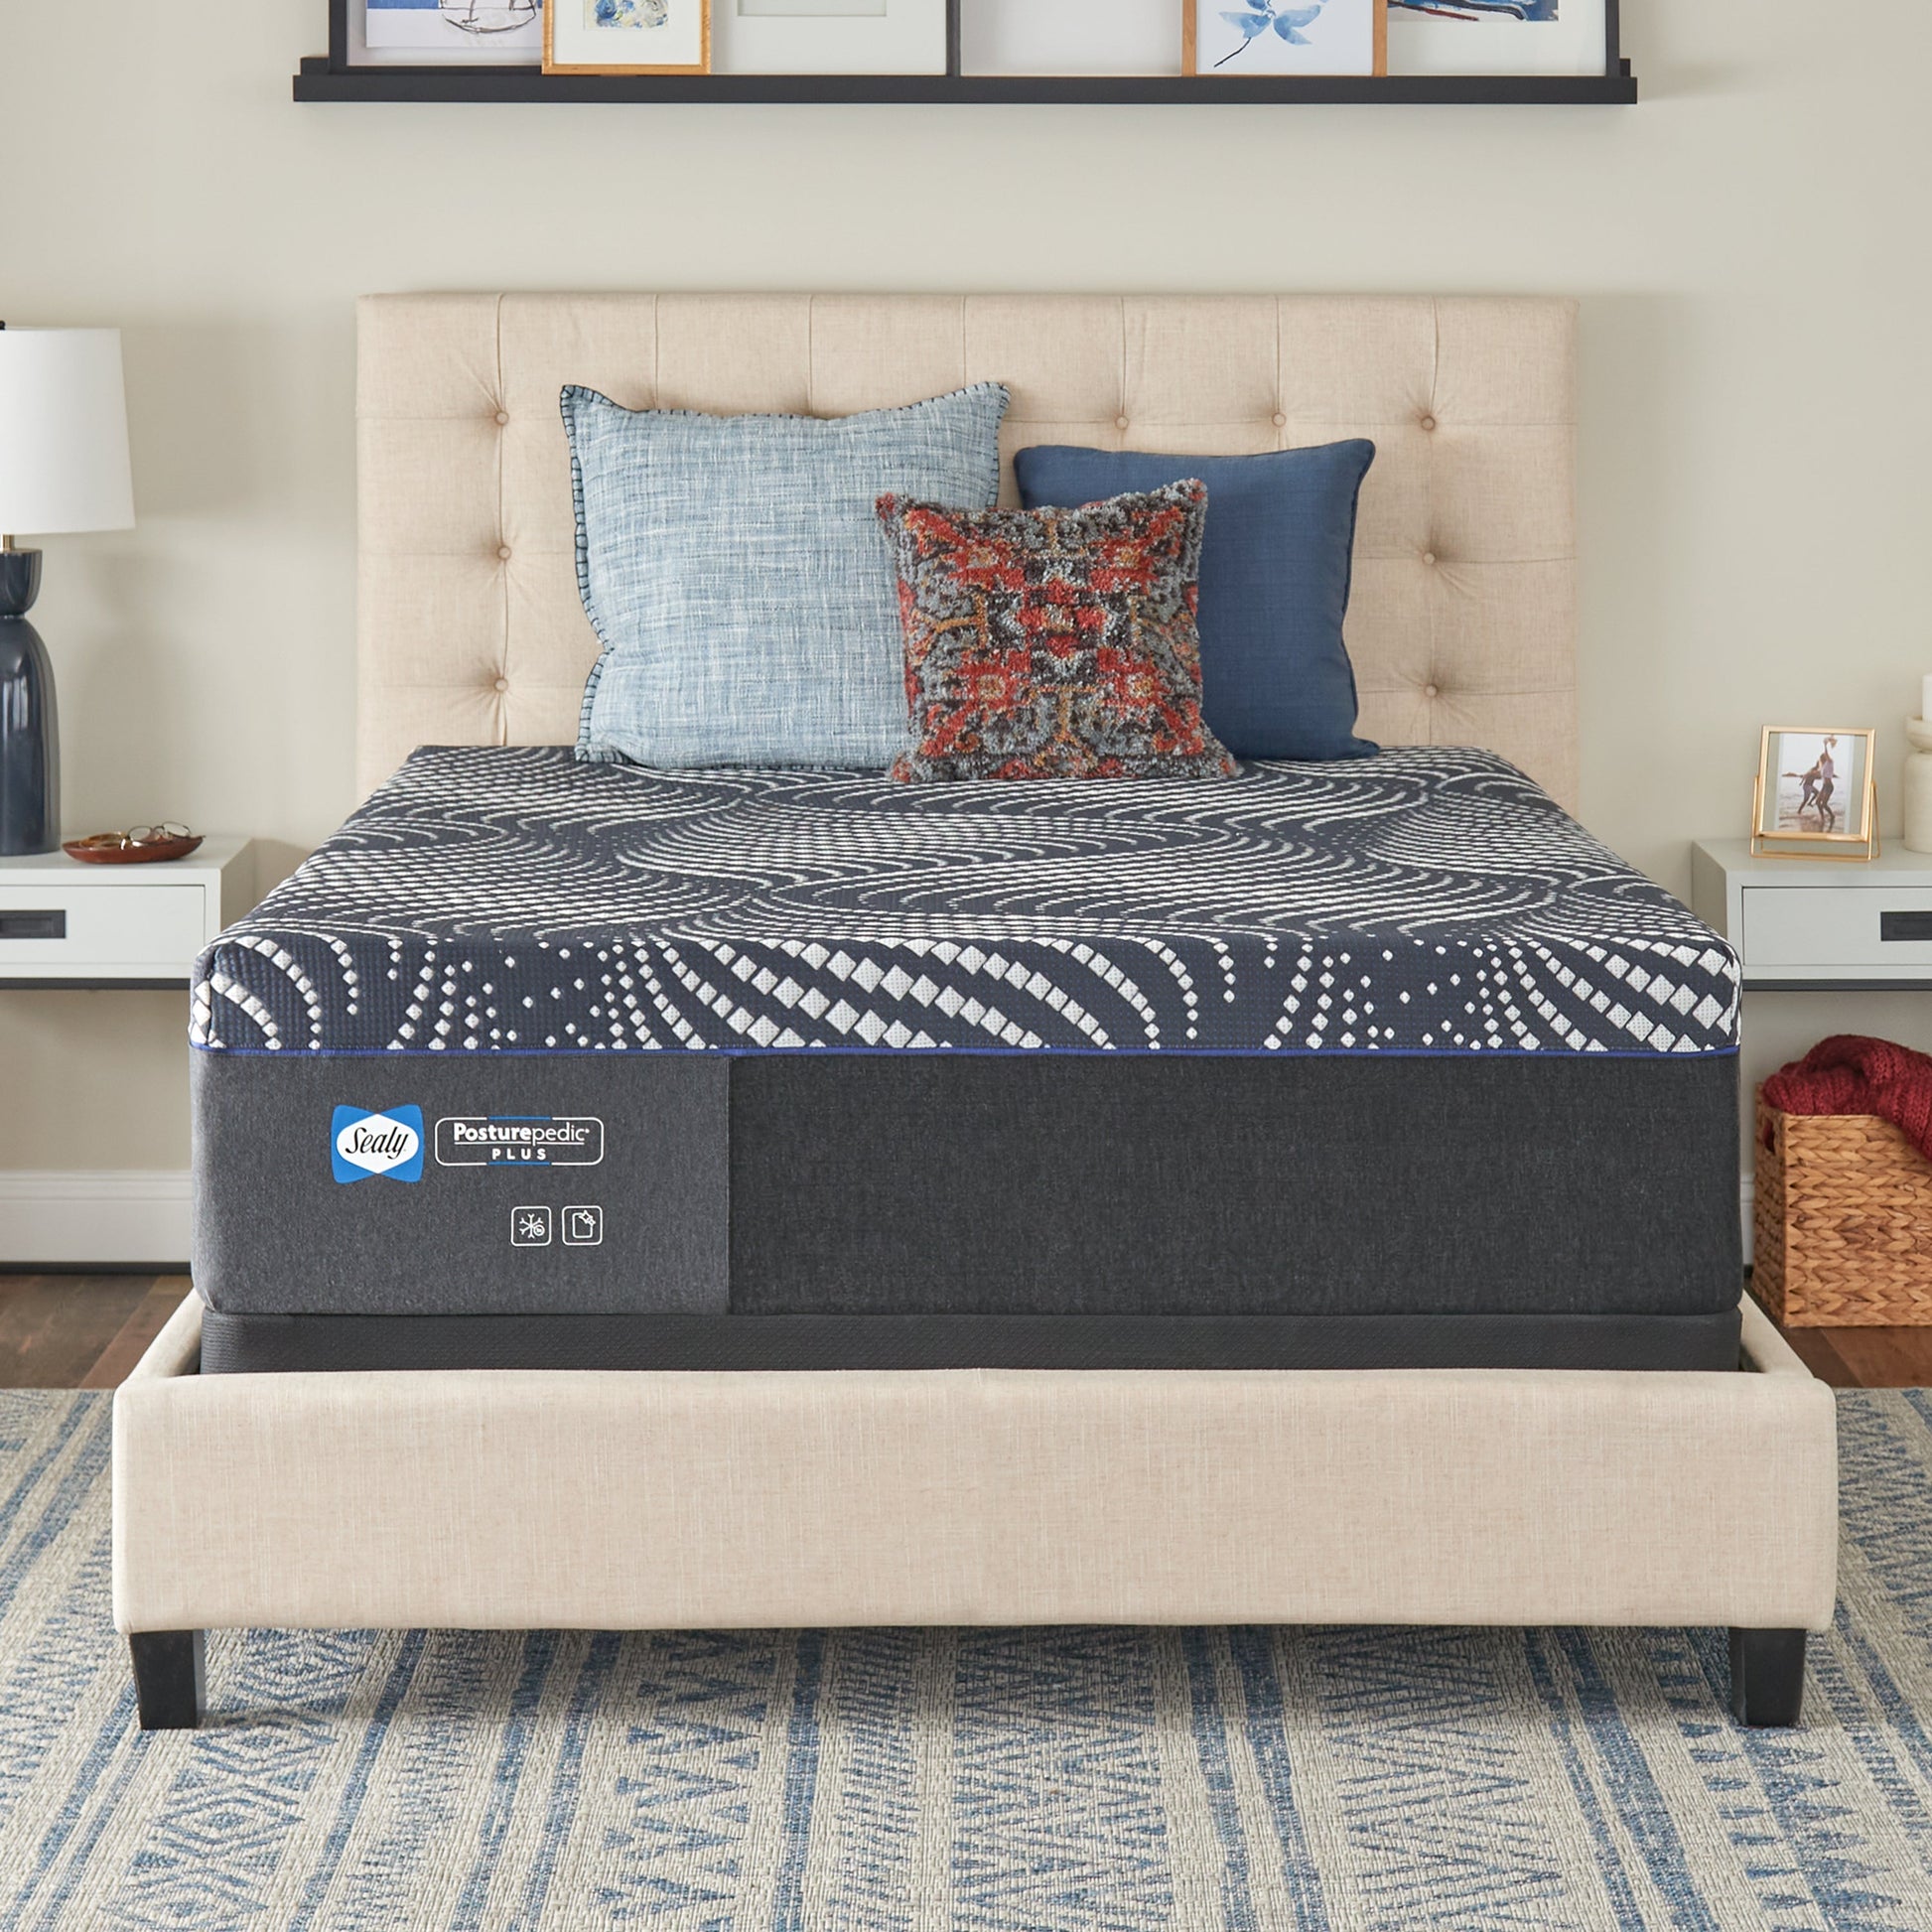 Sealy High Point Ultra Soft Mattress On Bed Frame In Bedroom Front View